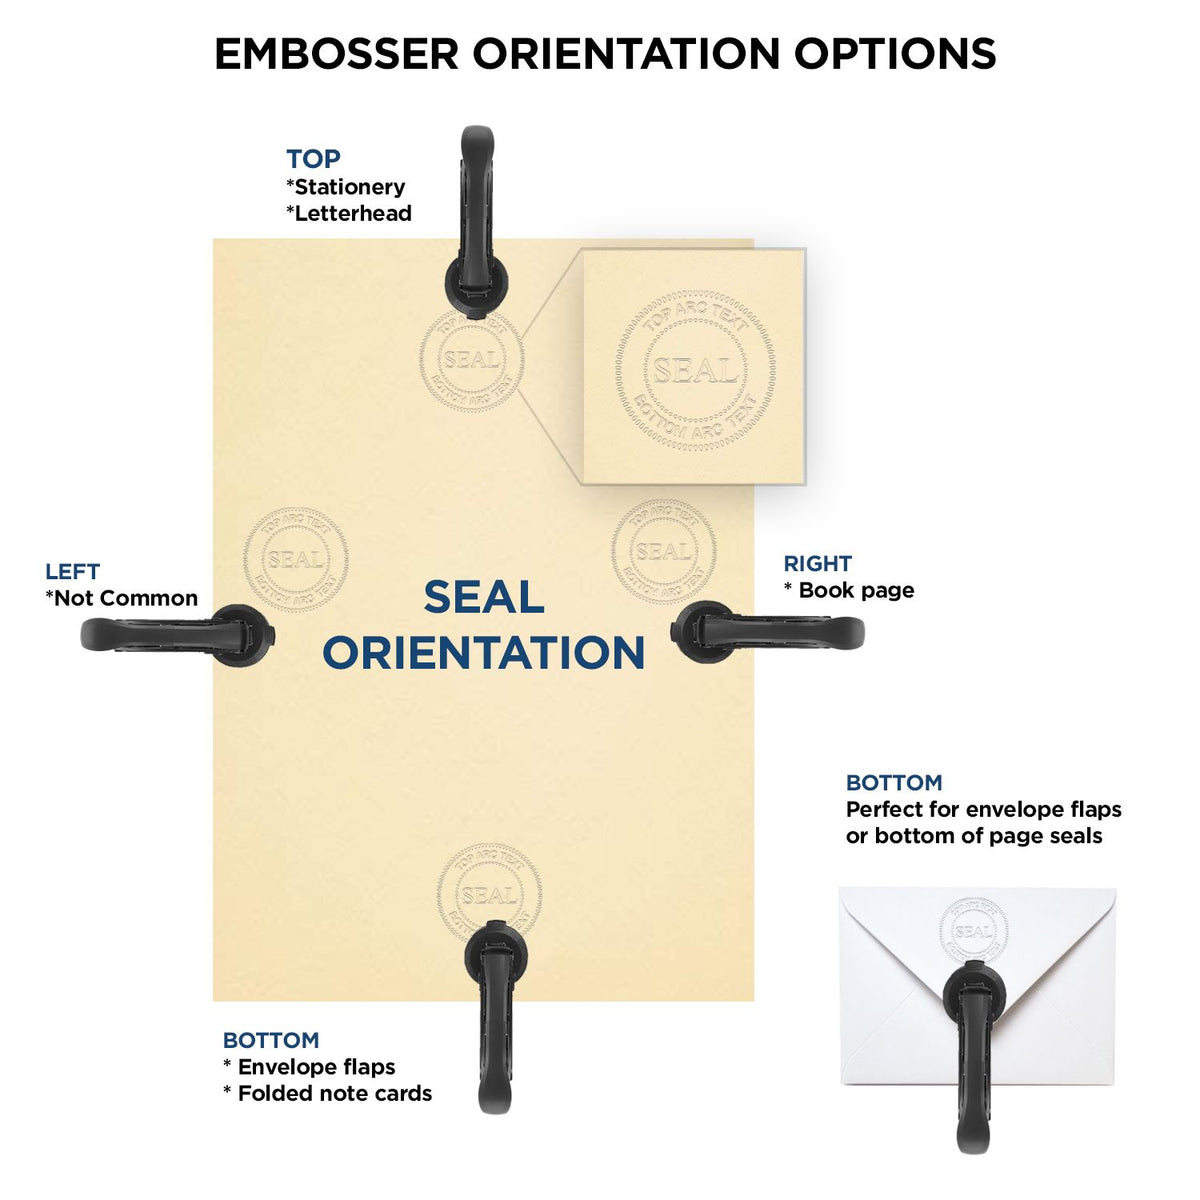 An infographic for the New Hampshire Geologist Desk Seal showing embosser orientation, this is showing examples of a top, bottom, right and left insert.